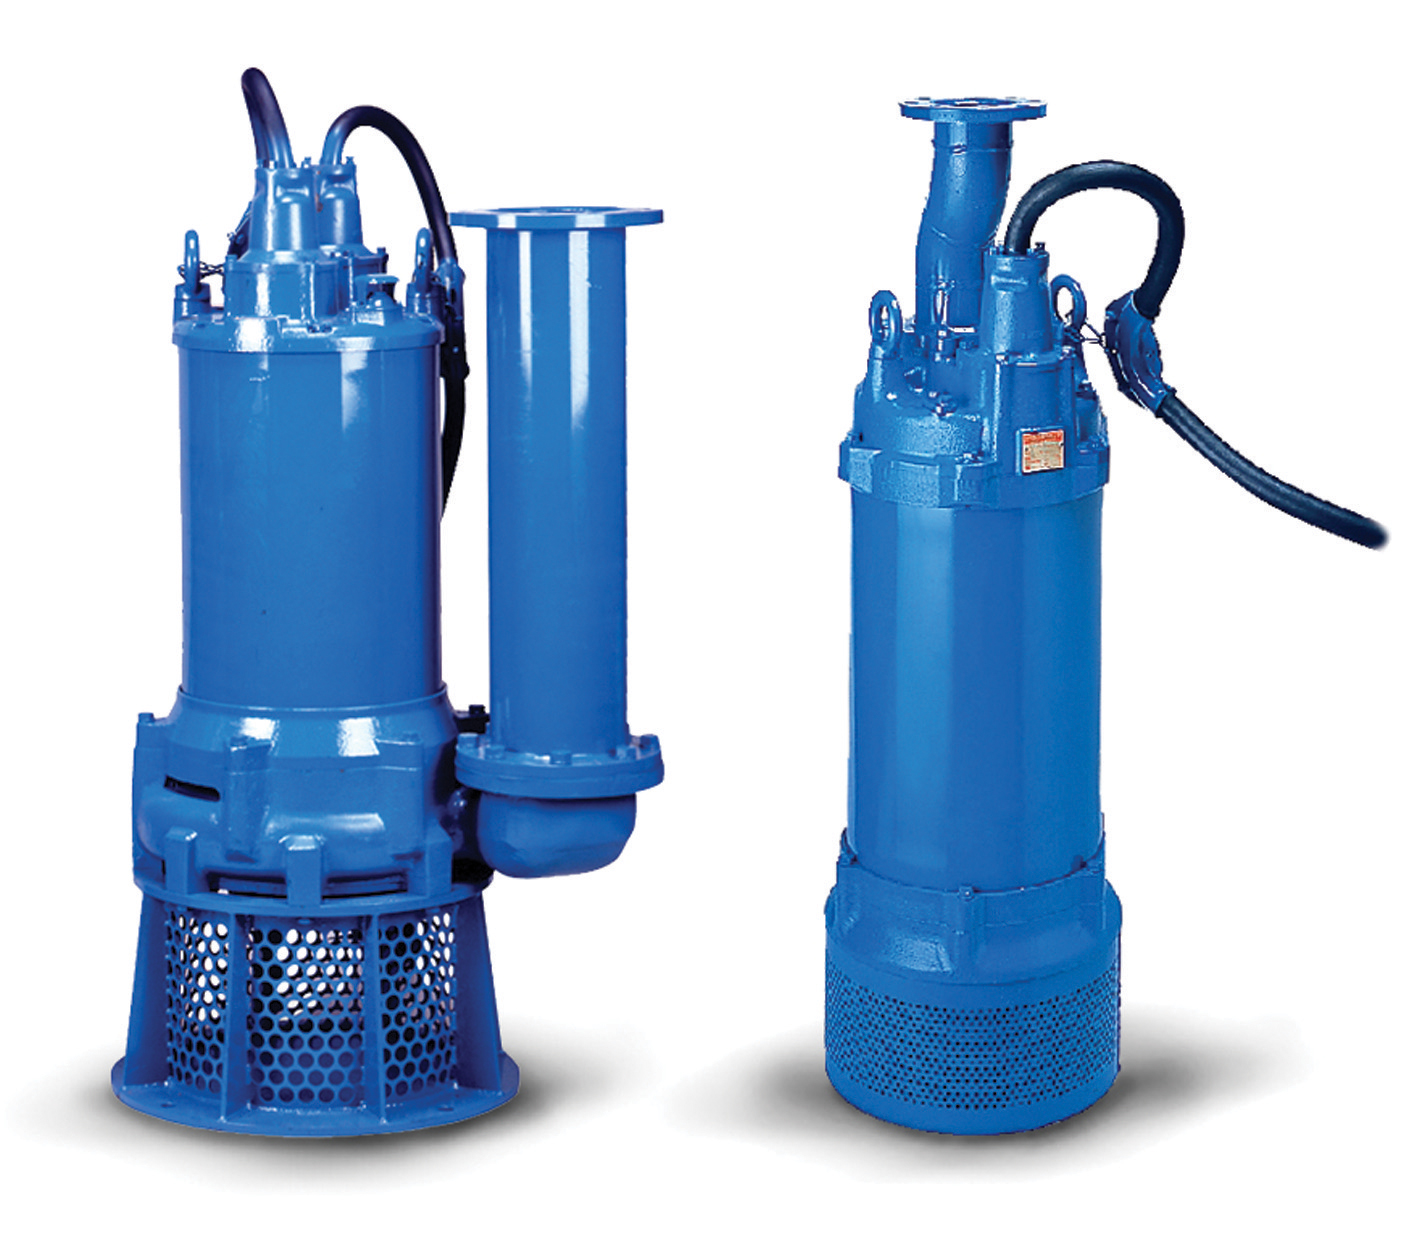 Two of Tsurumi's new submersible pumps